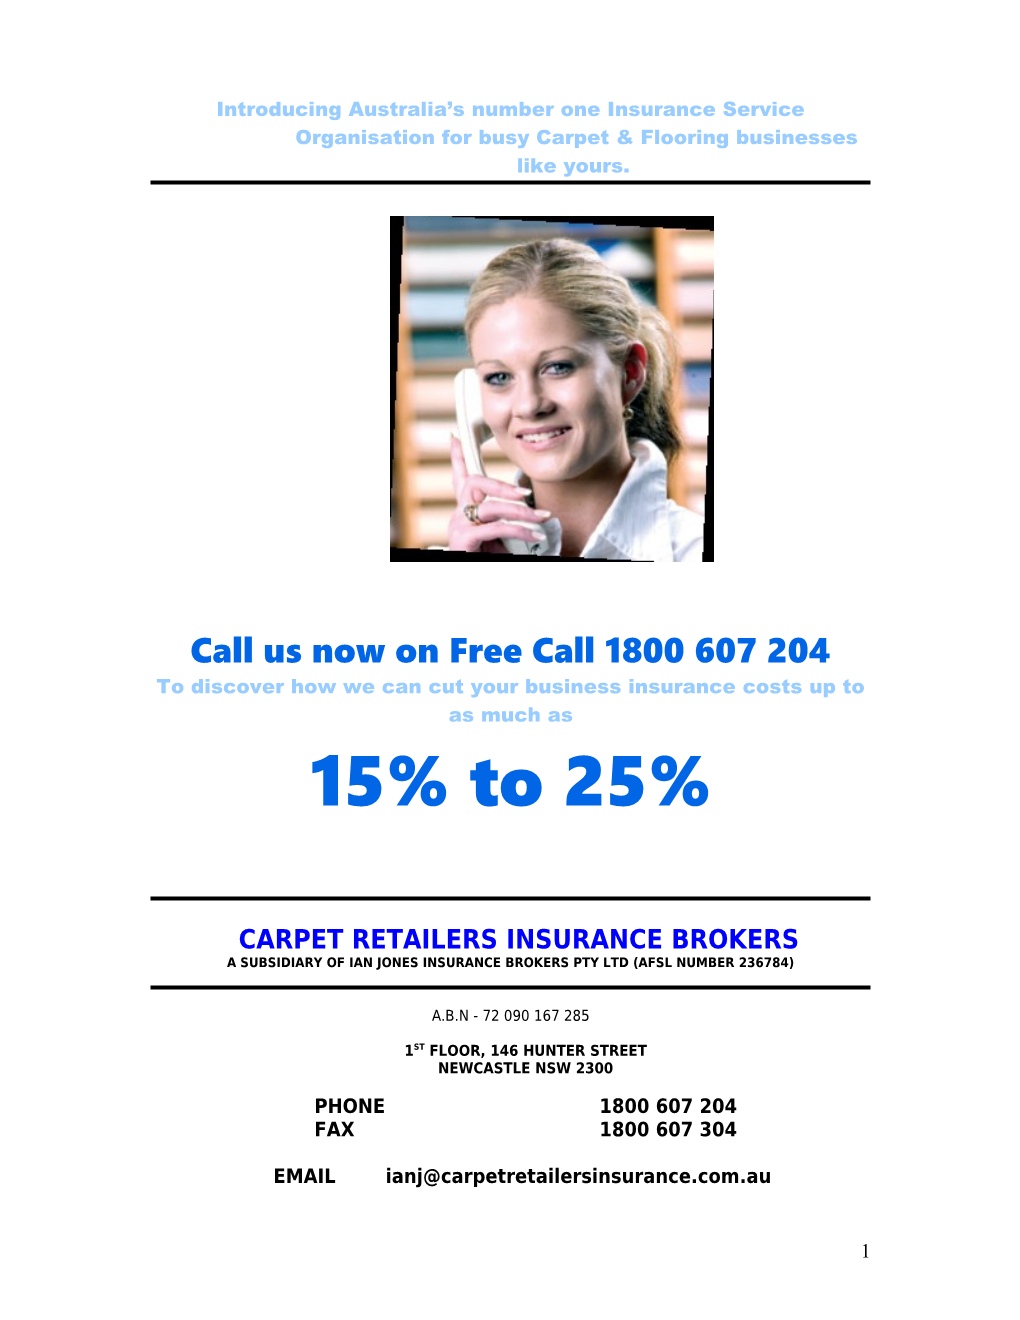 Call Us Now on Free Call 1800 607 204